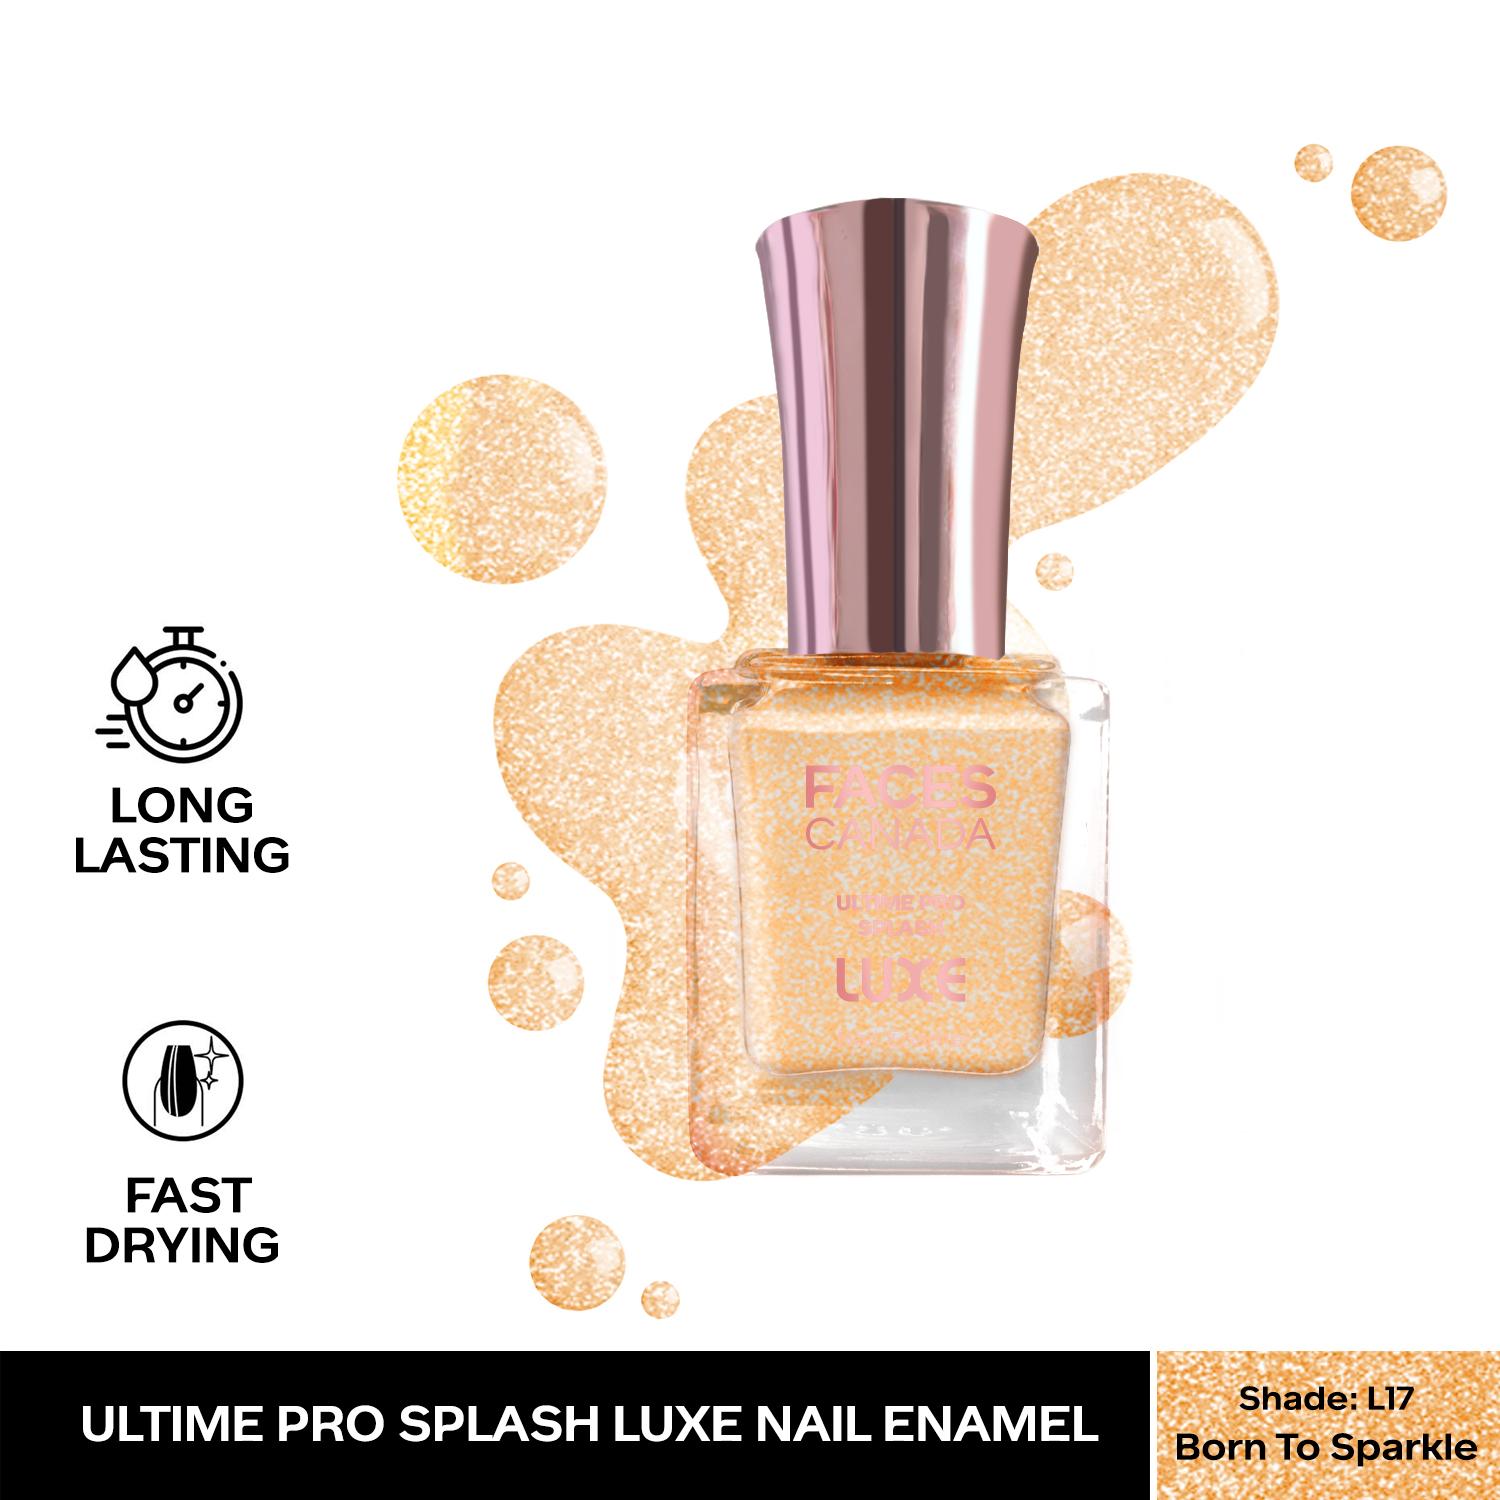 Faces Canada | Faces Canada Ultime Pro Splash Luxe Nail Enamel - Born to Sparkle (L17), Glossy Finish (12 ml)